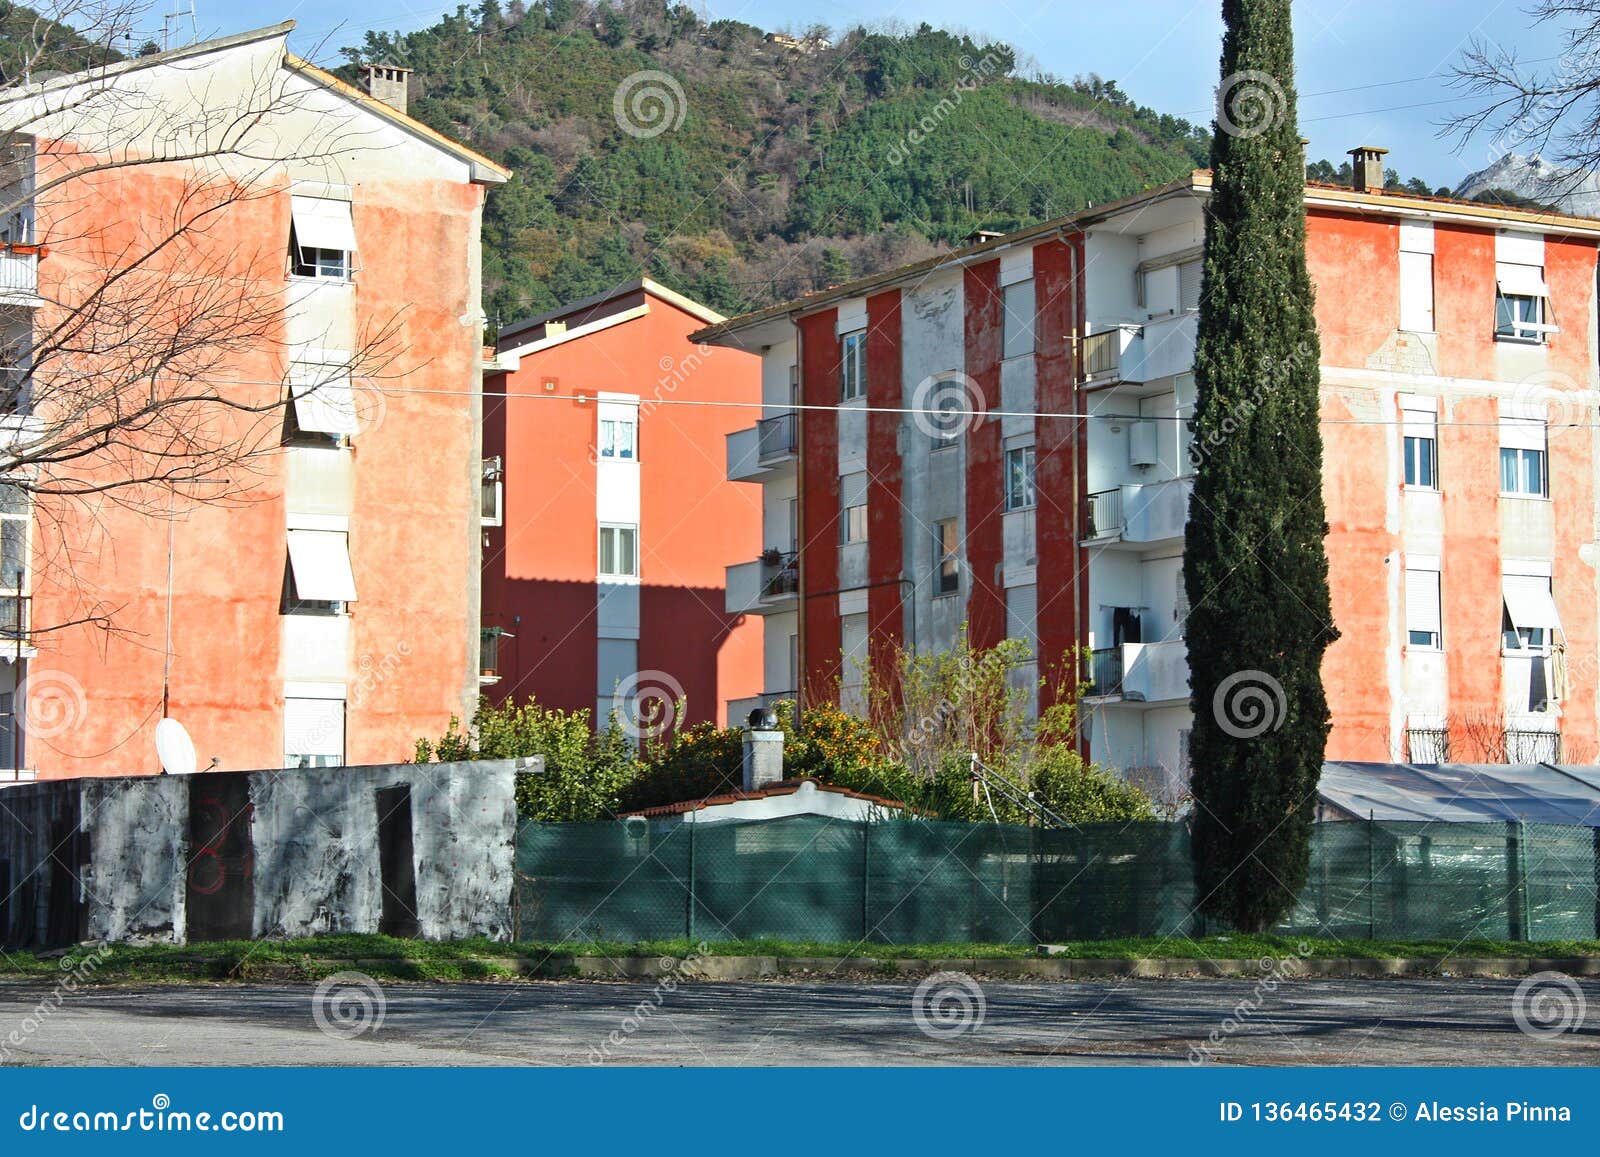 urban agglomeration of popular, old, dilapidated houses